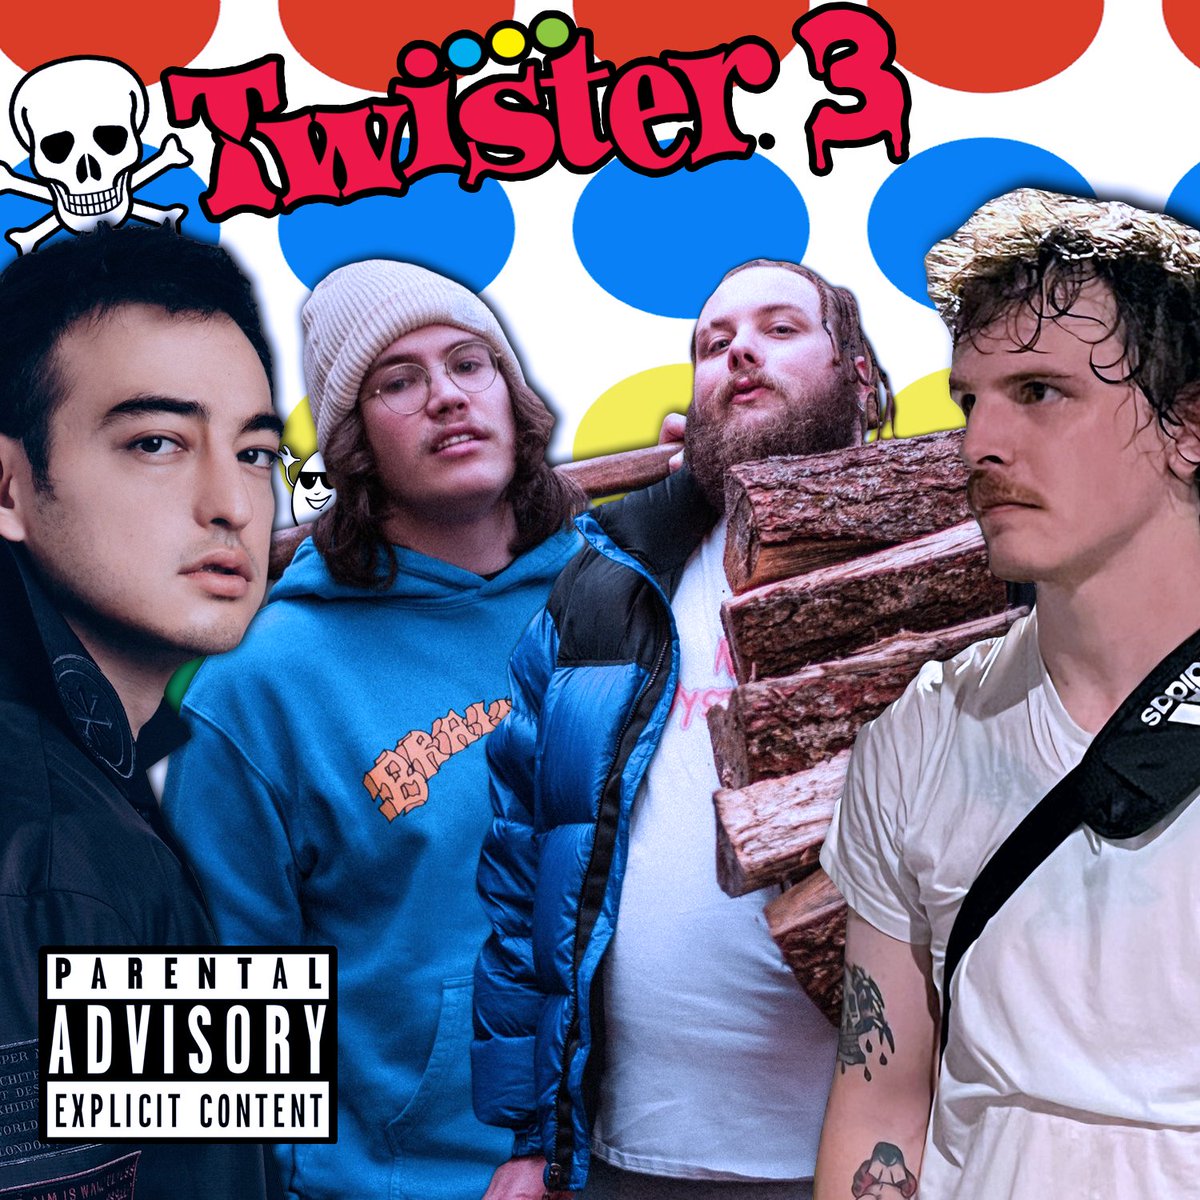 Deadly twister 3 coming soon.....